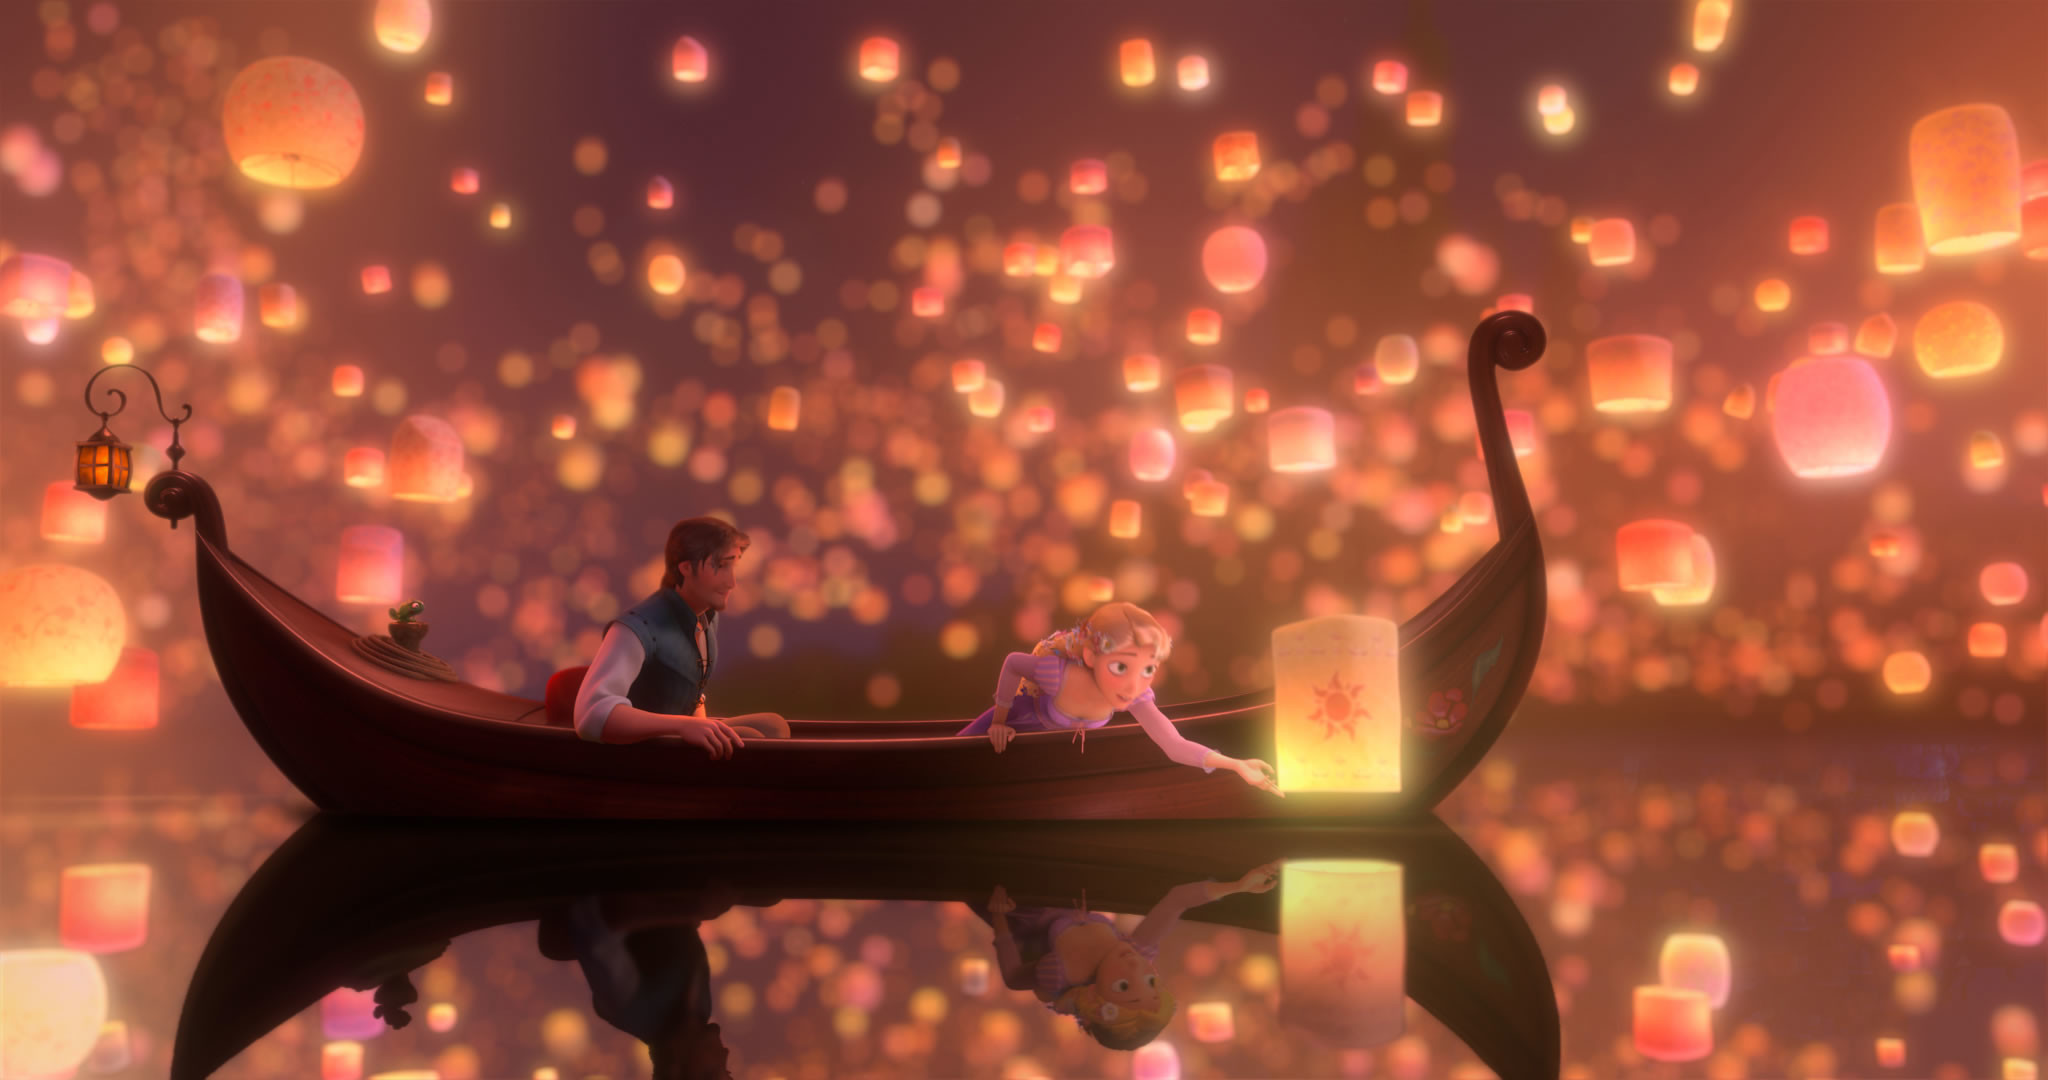 2048x1080 Tangled, HQ Definition Wallpaper, Mullally.  0.167 MB. Tangled  Pics. High Definition Tangled Wallpaper ...